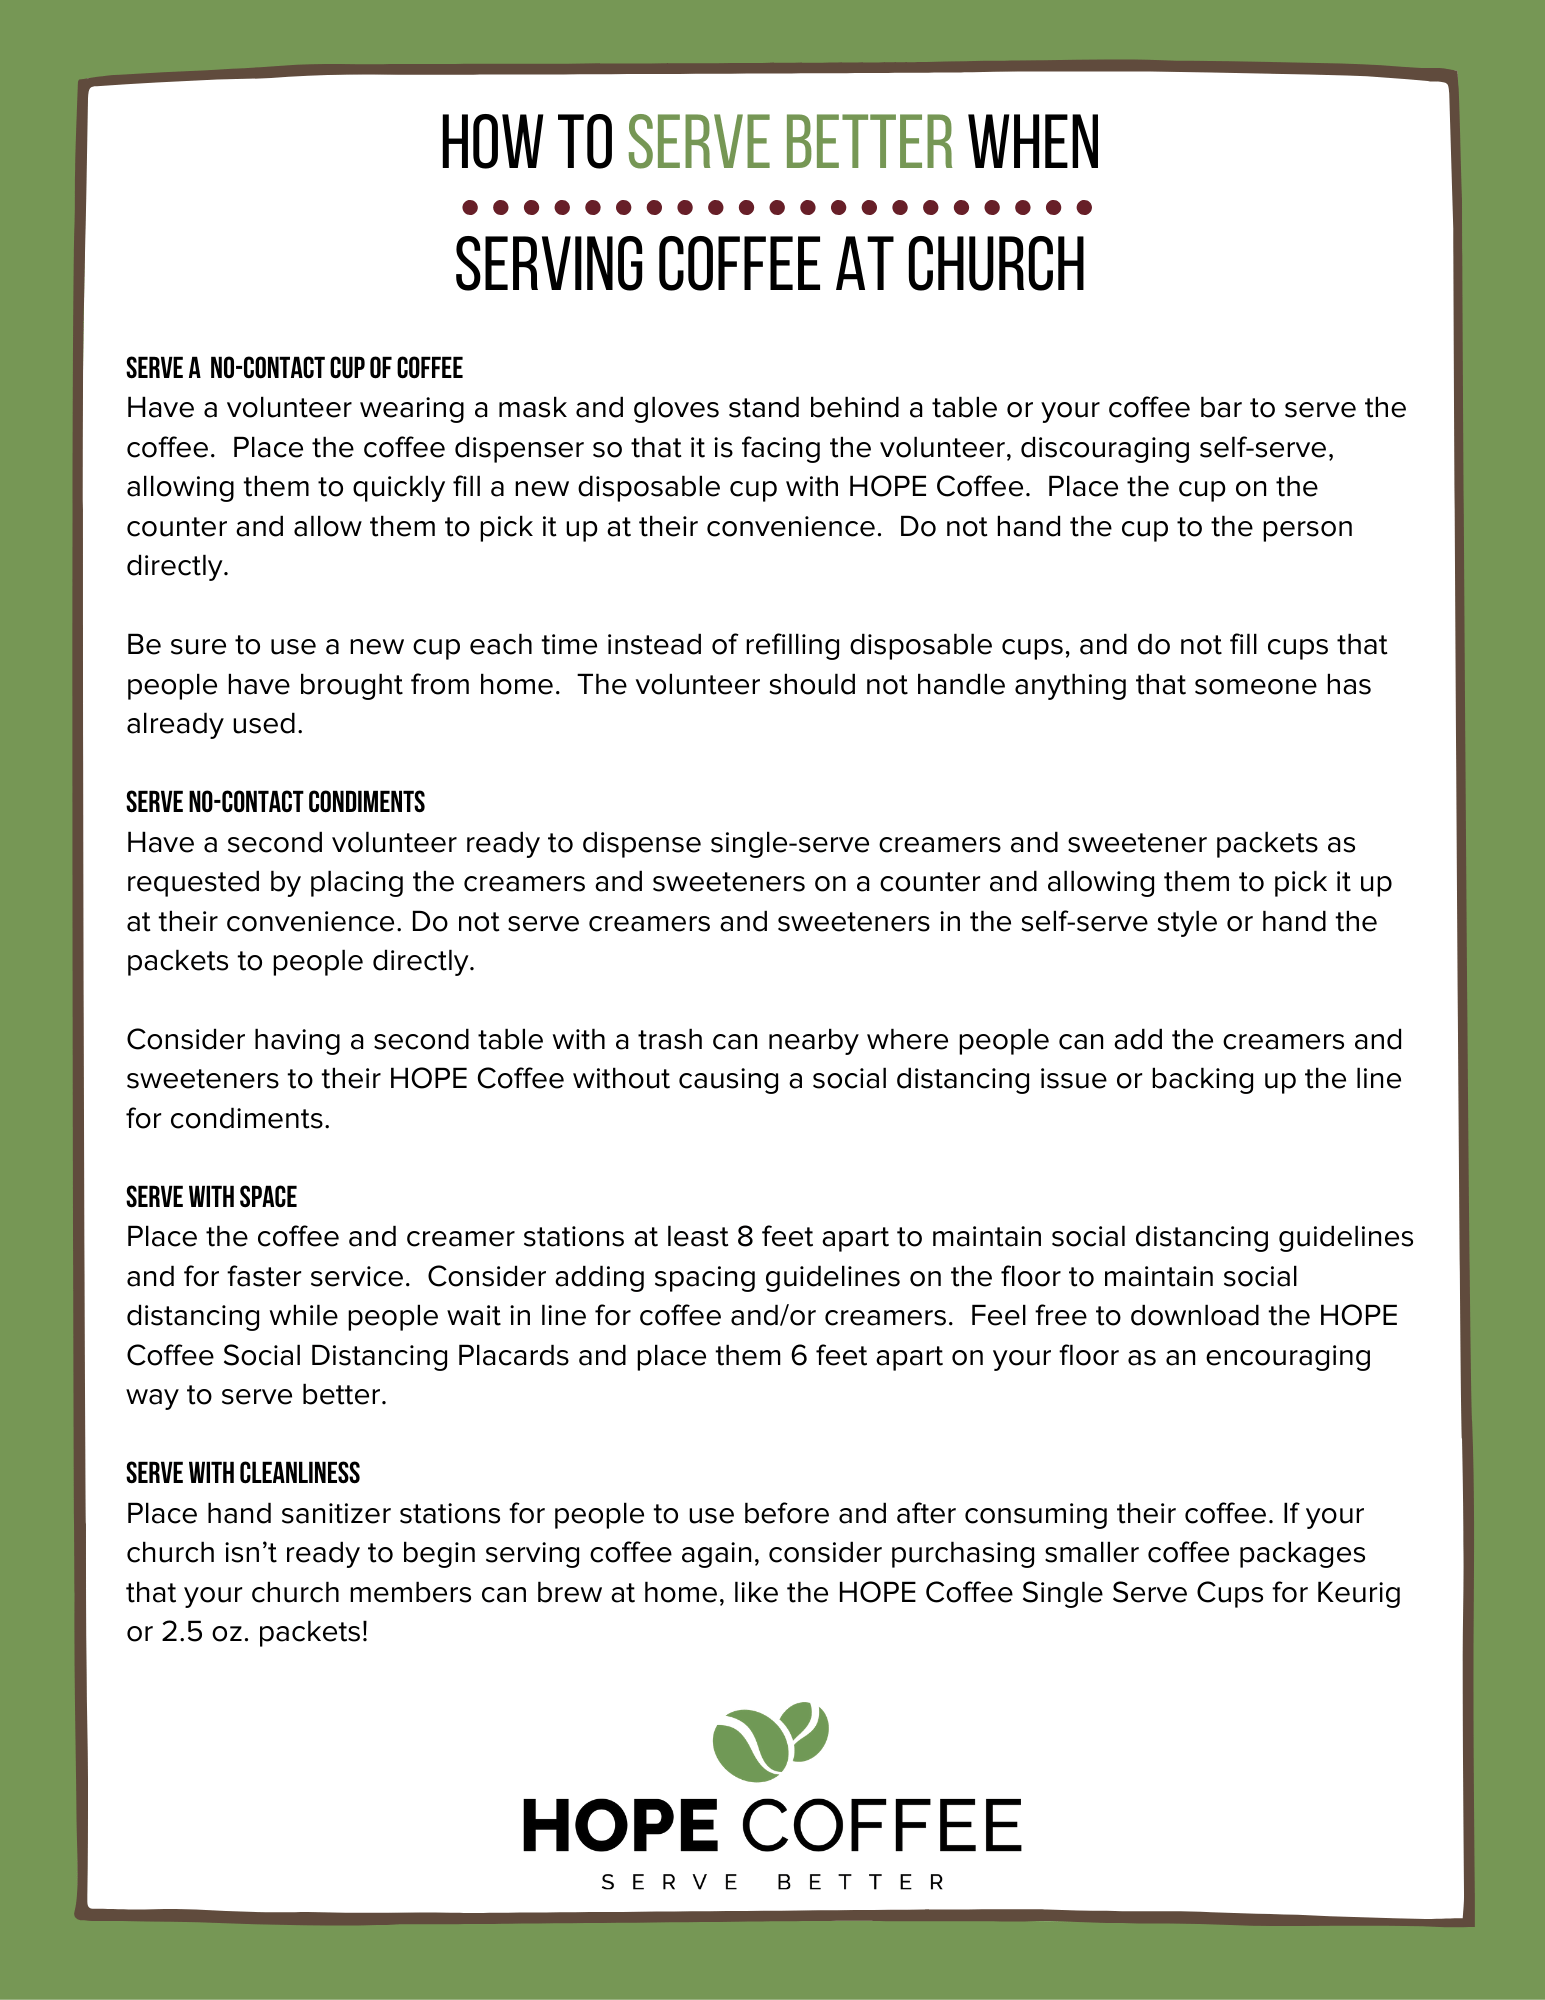 How to Safely Serve Coffee